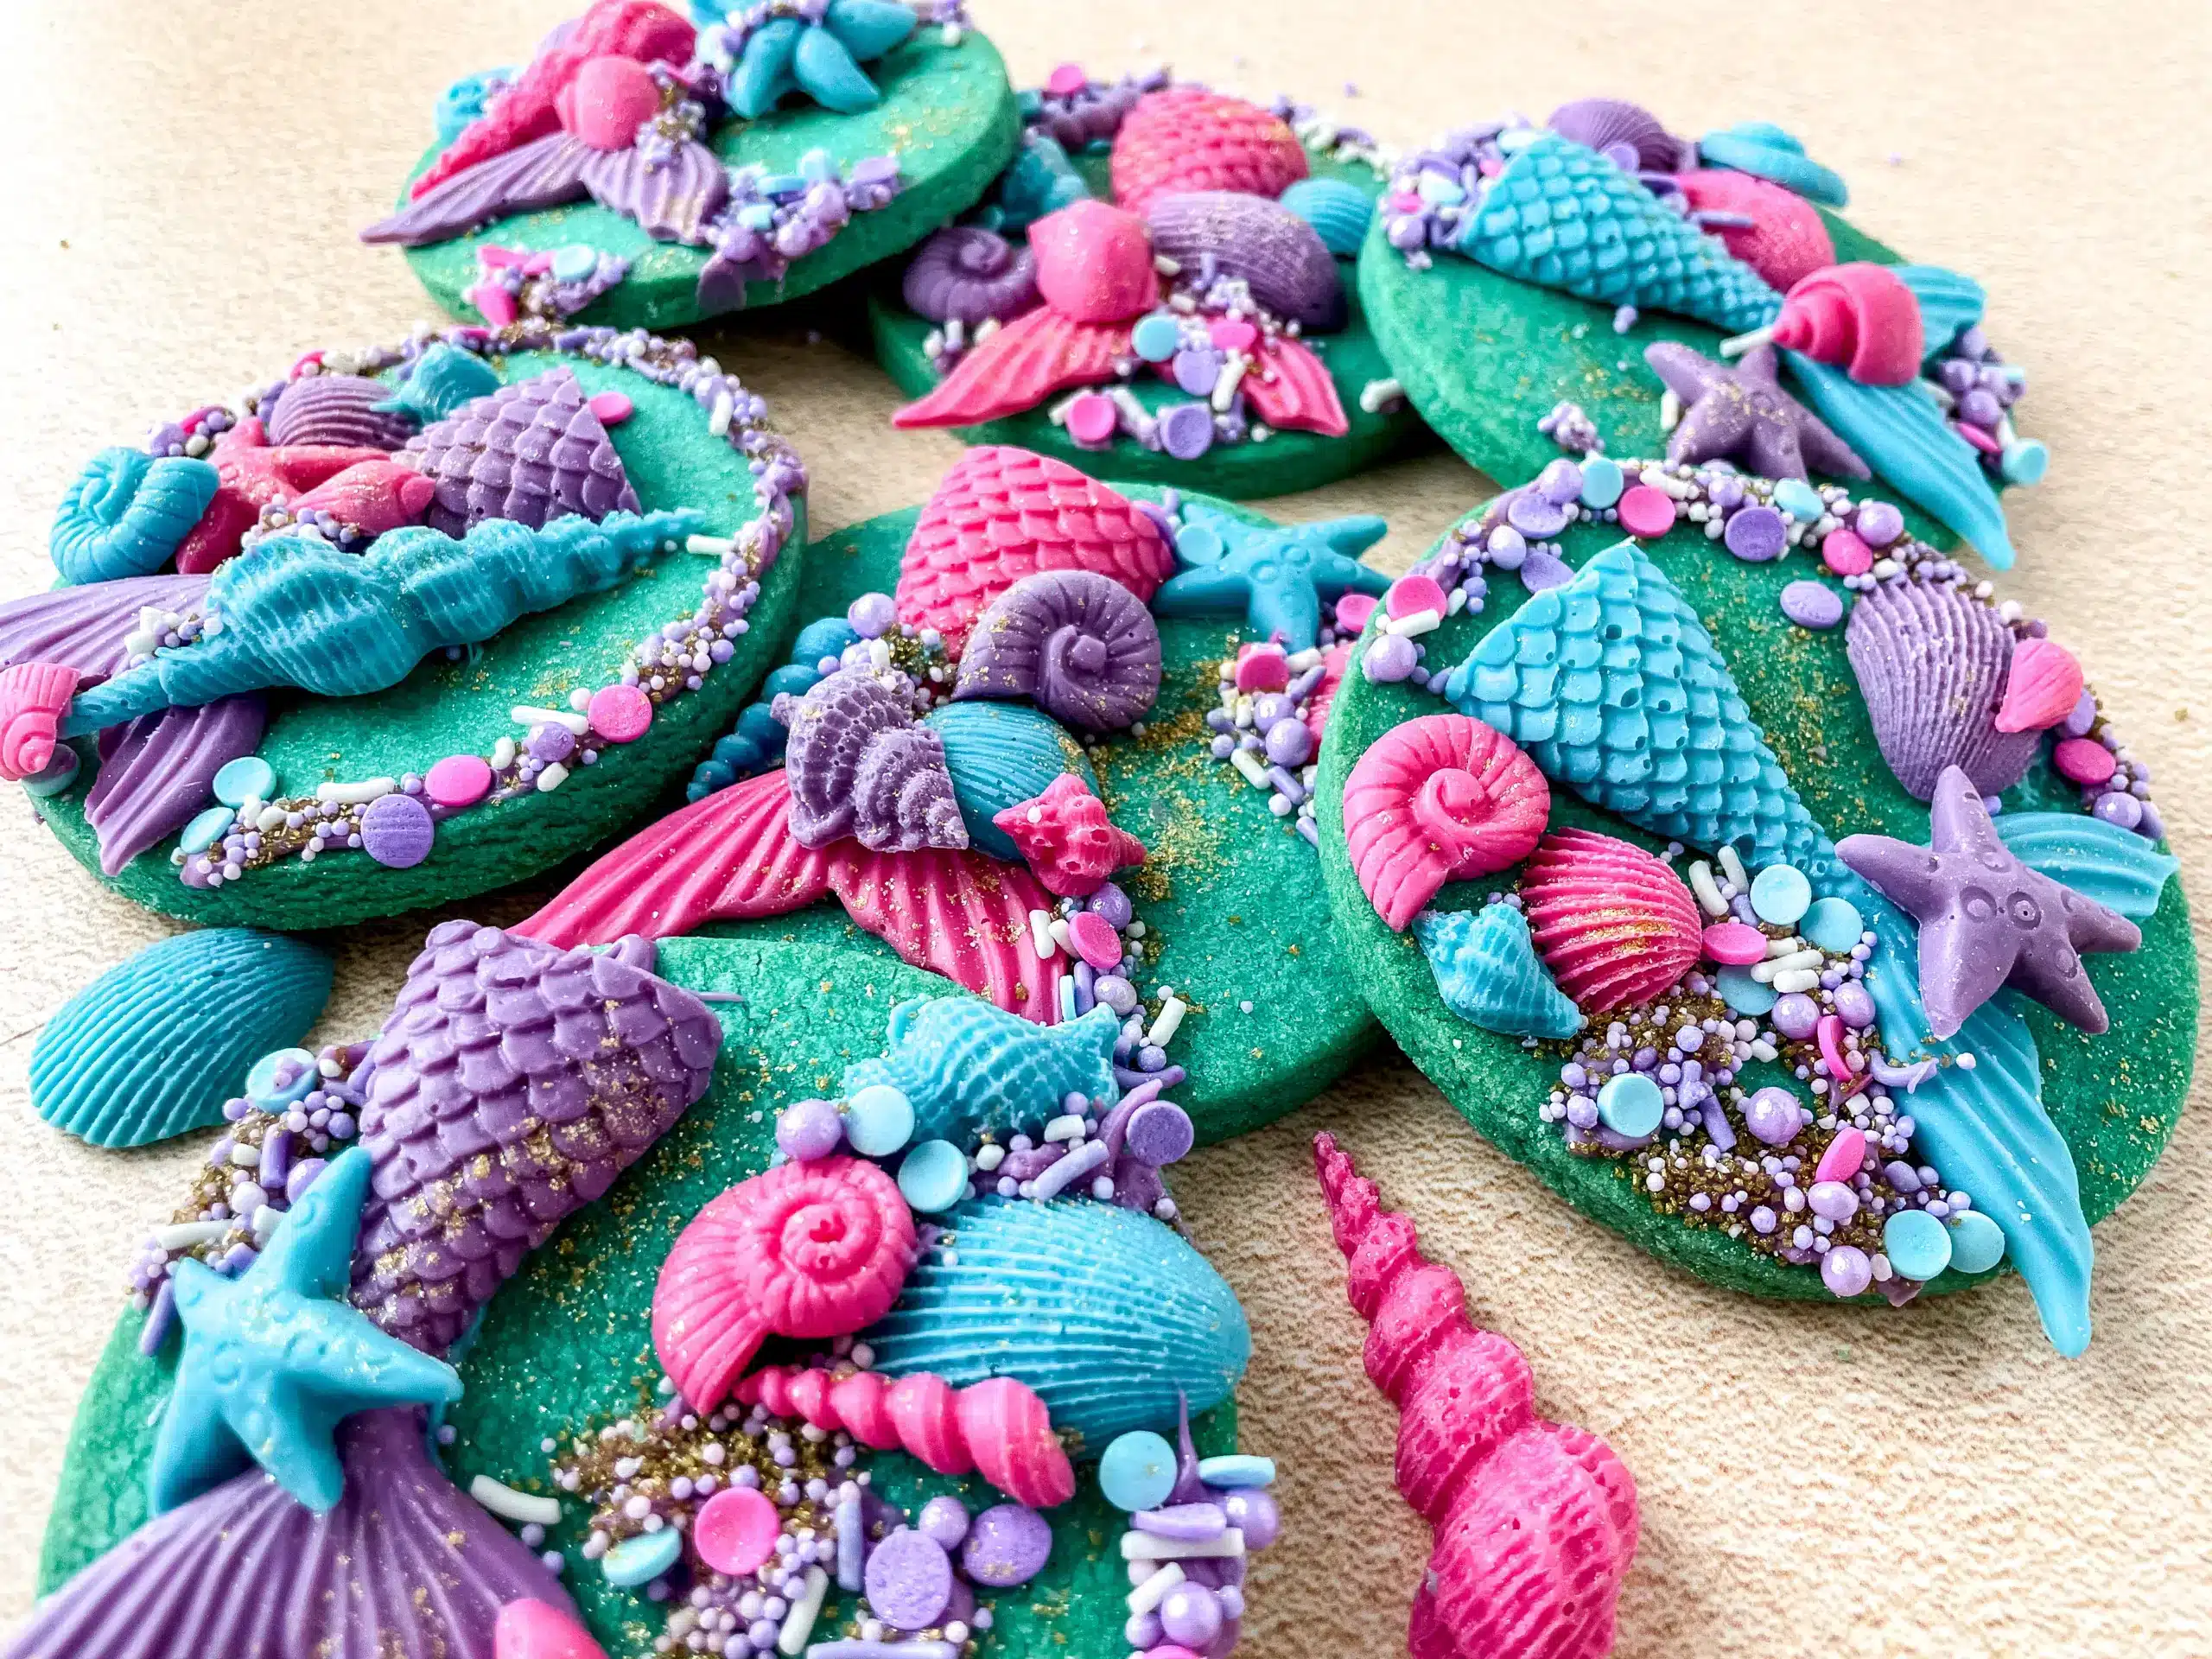 Delicious and Whimsical Mermaid Cookies (Eggless Recipe)